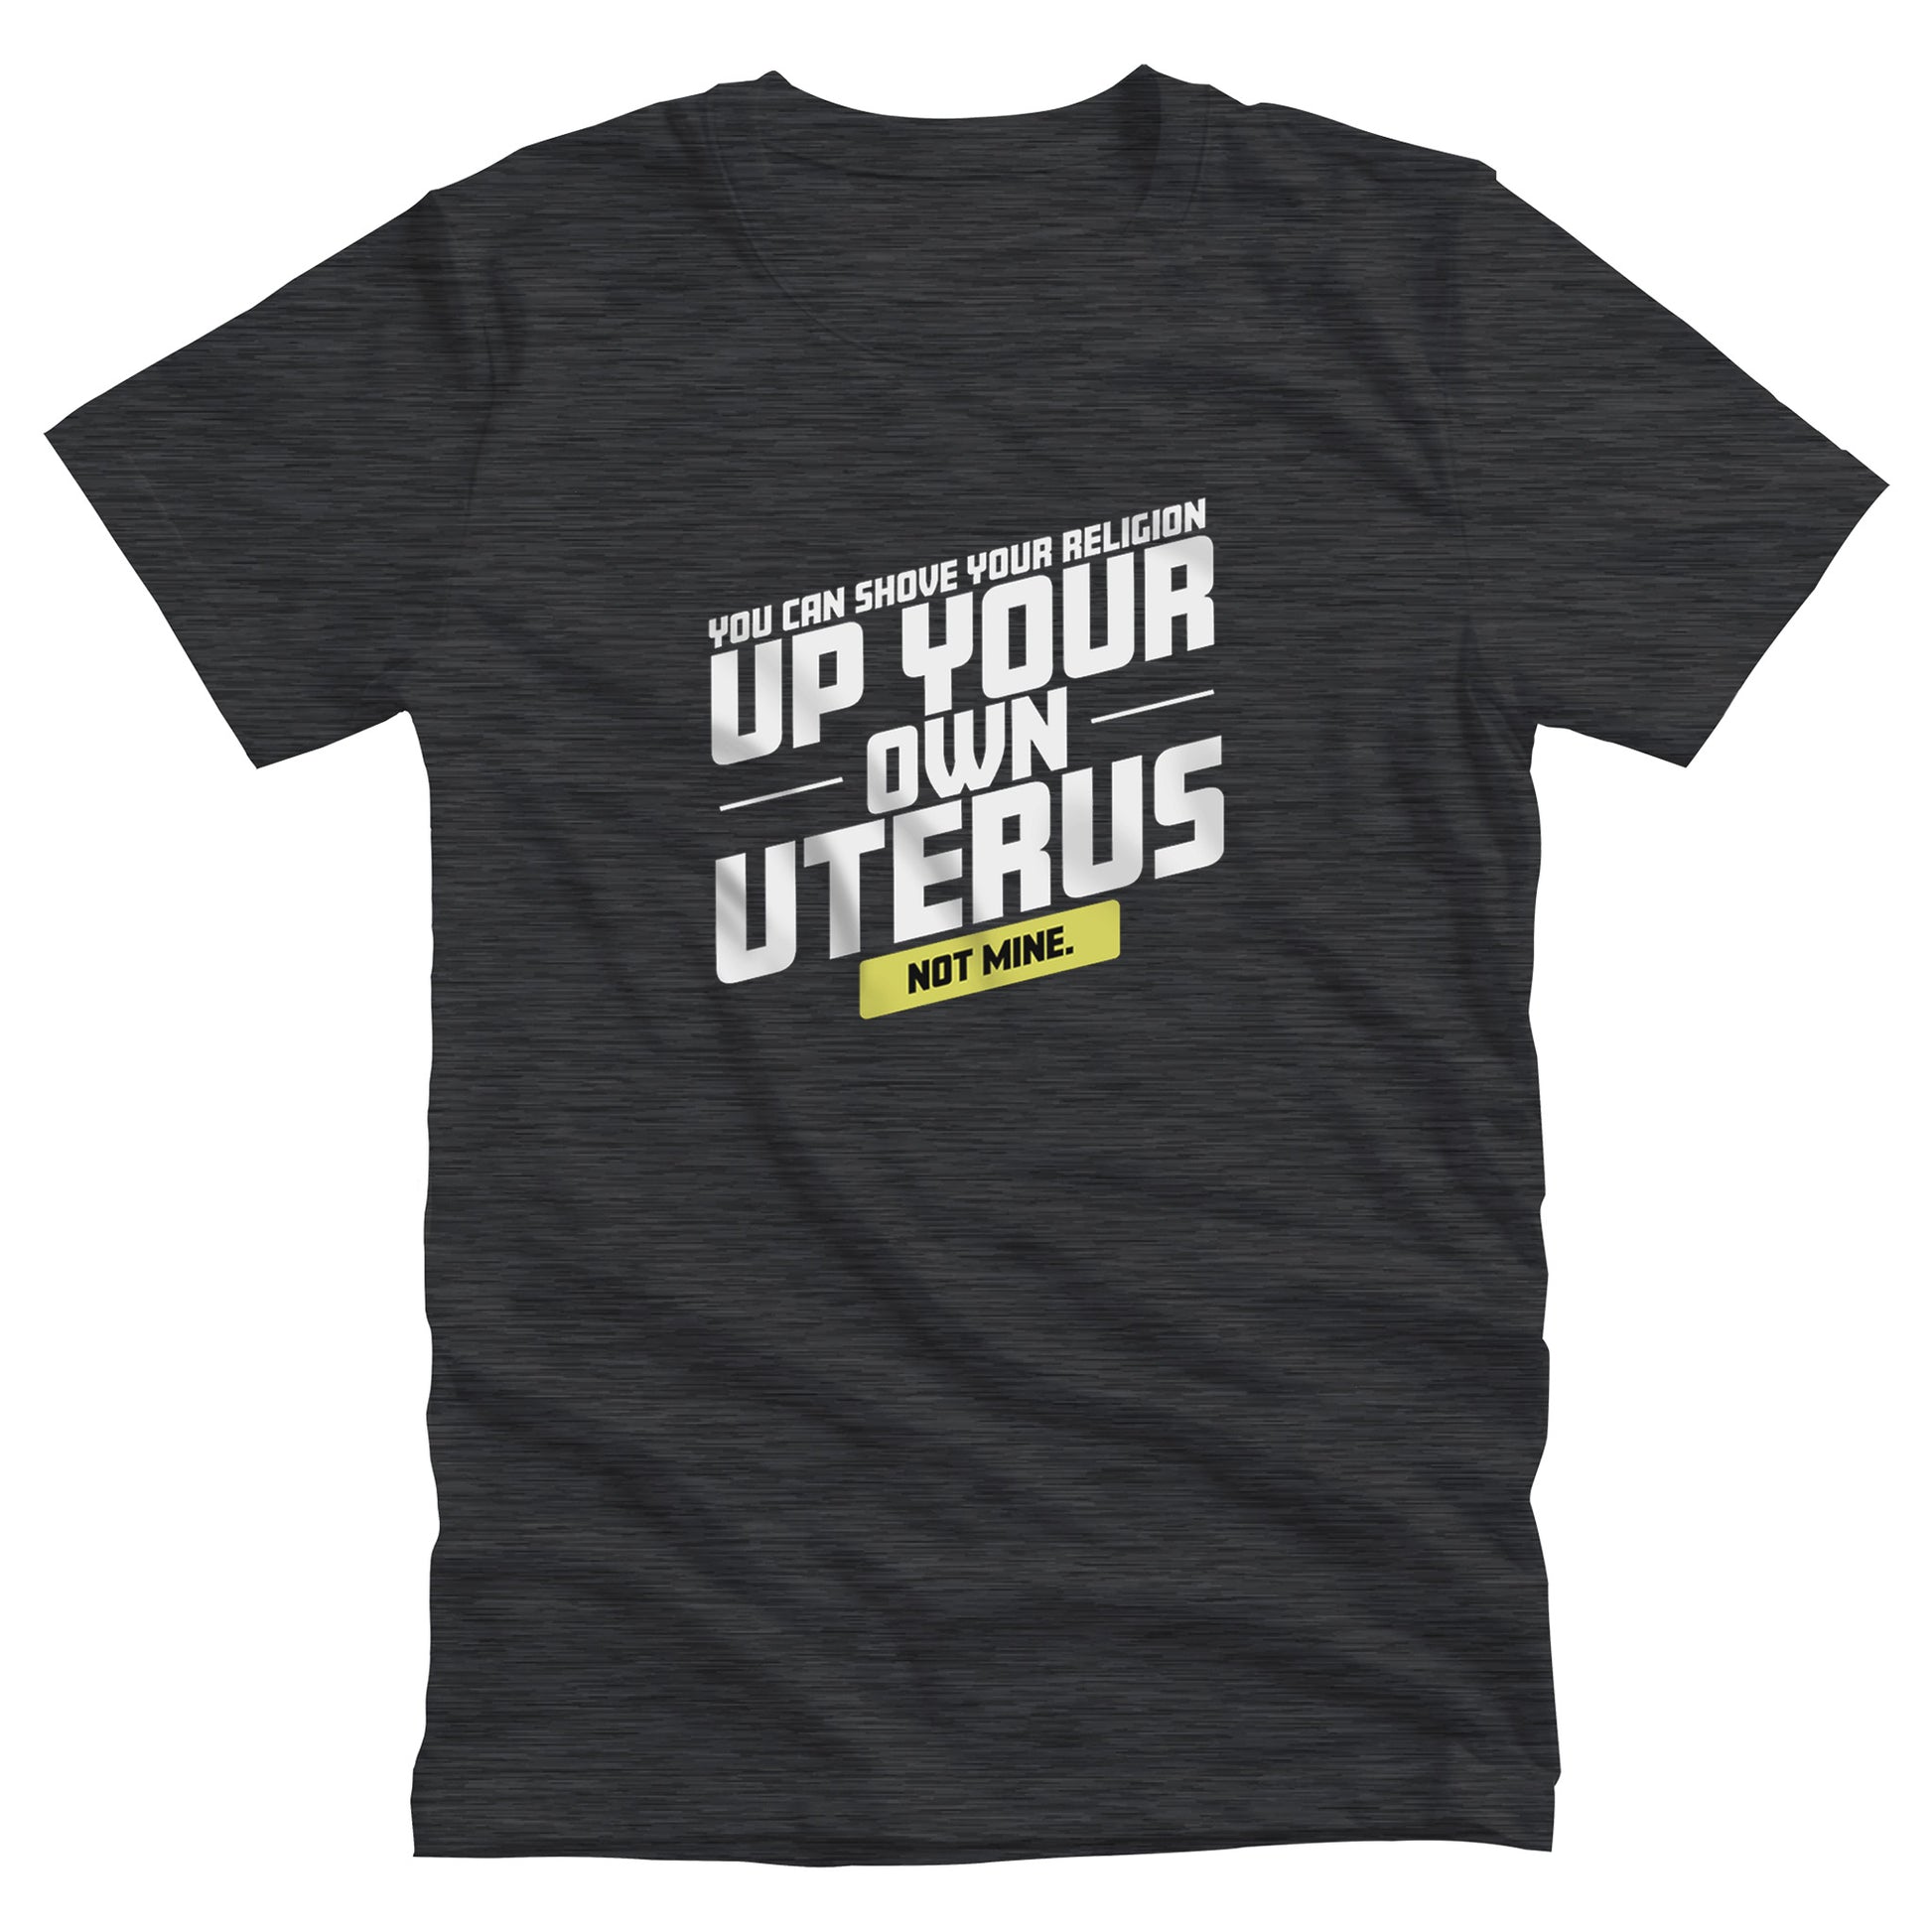 Dark Grey Heather color unisex t-shirt that says, “You Can Shove Your Religion Up Your Own Uterus, Not Mine.” The text is all slanted upwards, and the words “Not Mine” are in a yellow rectangle.